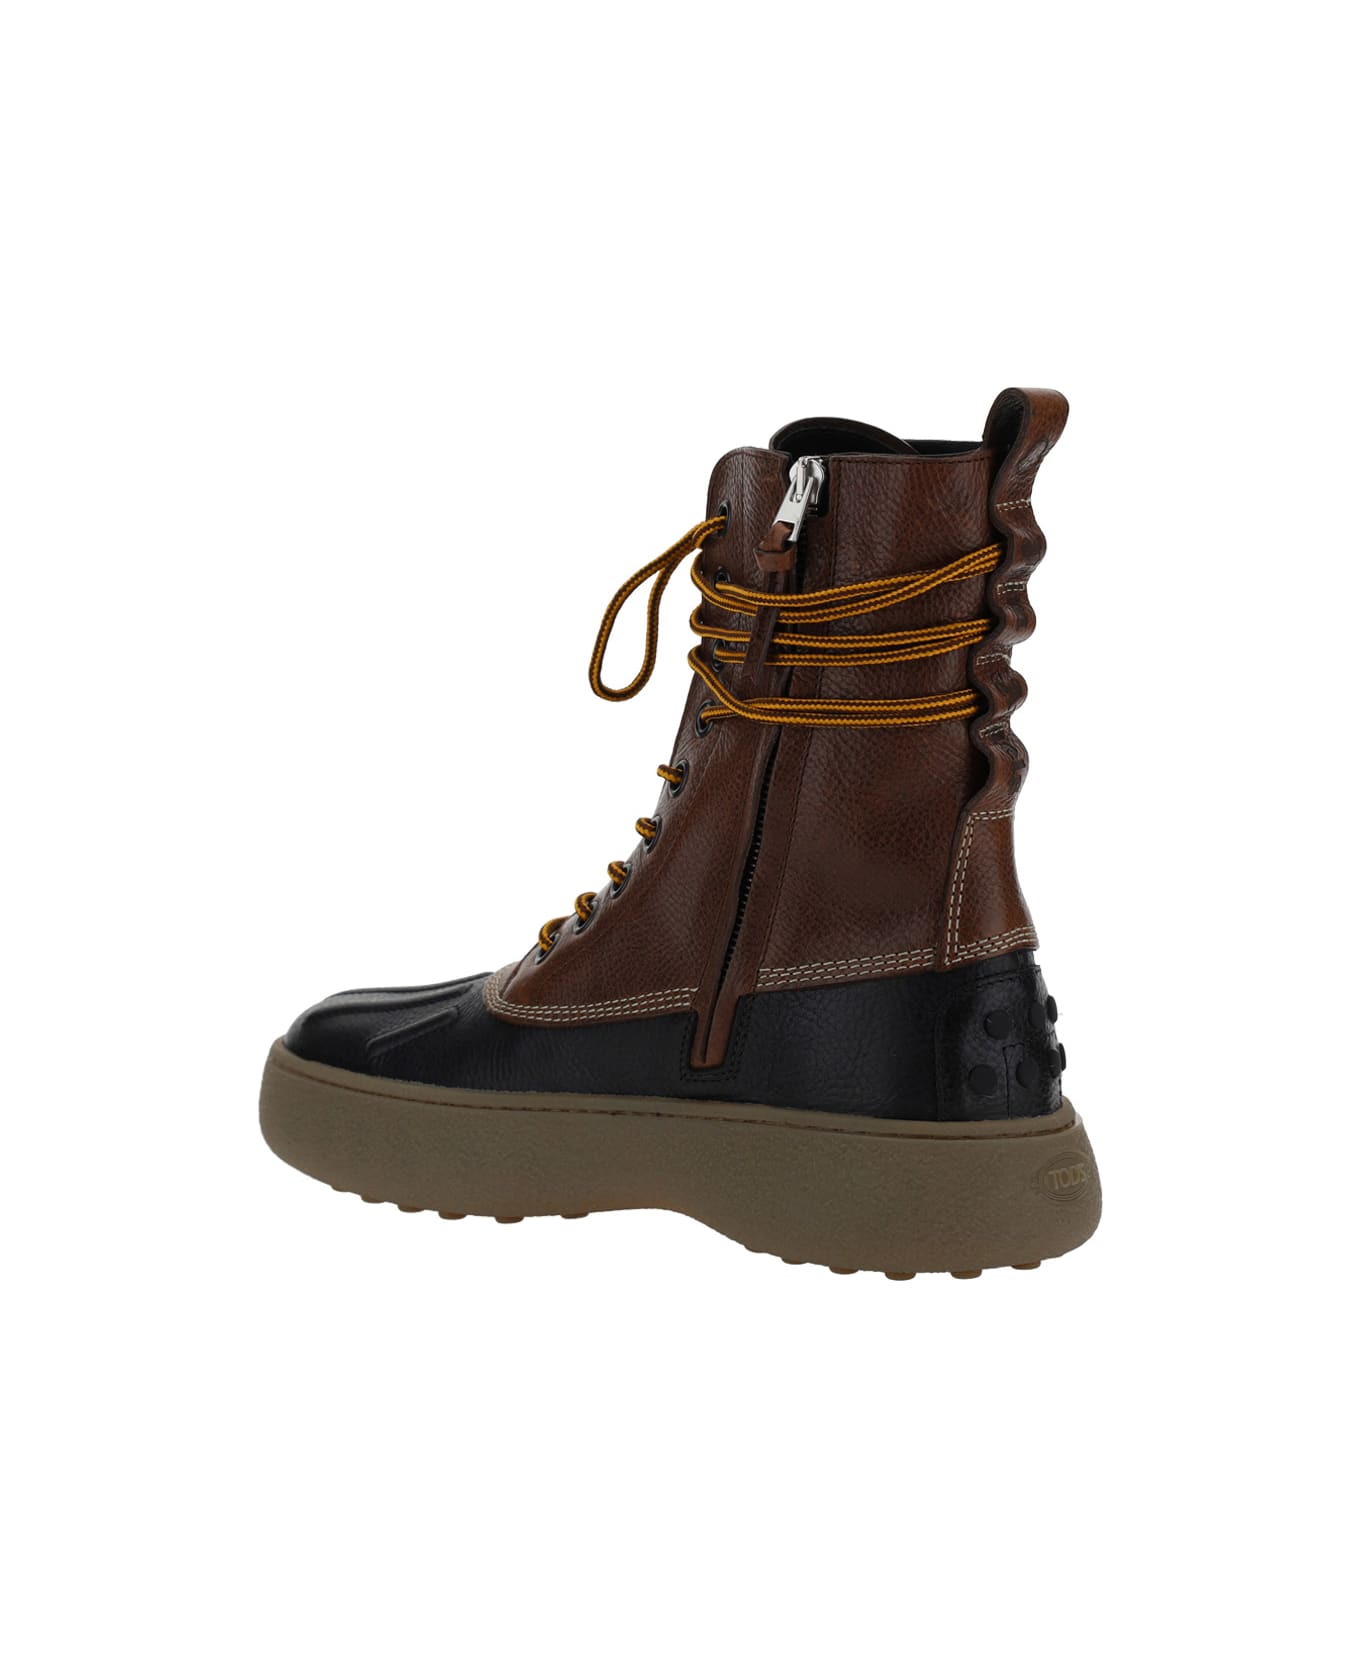 Moncler X Palm Angels Palm Angels X Moncler Winter Boots - Marrone